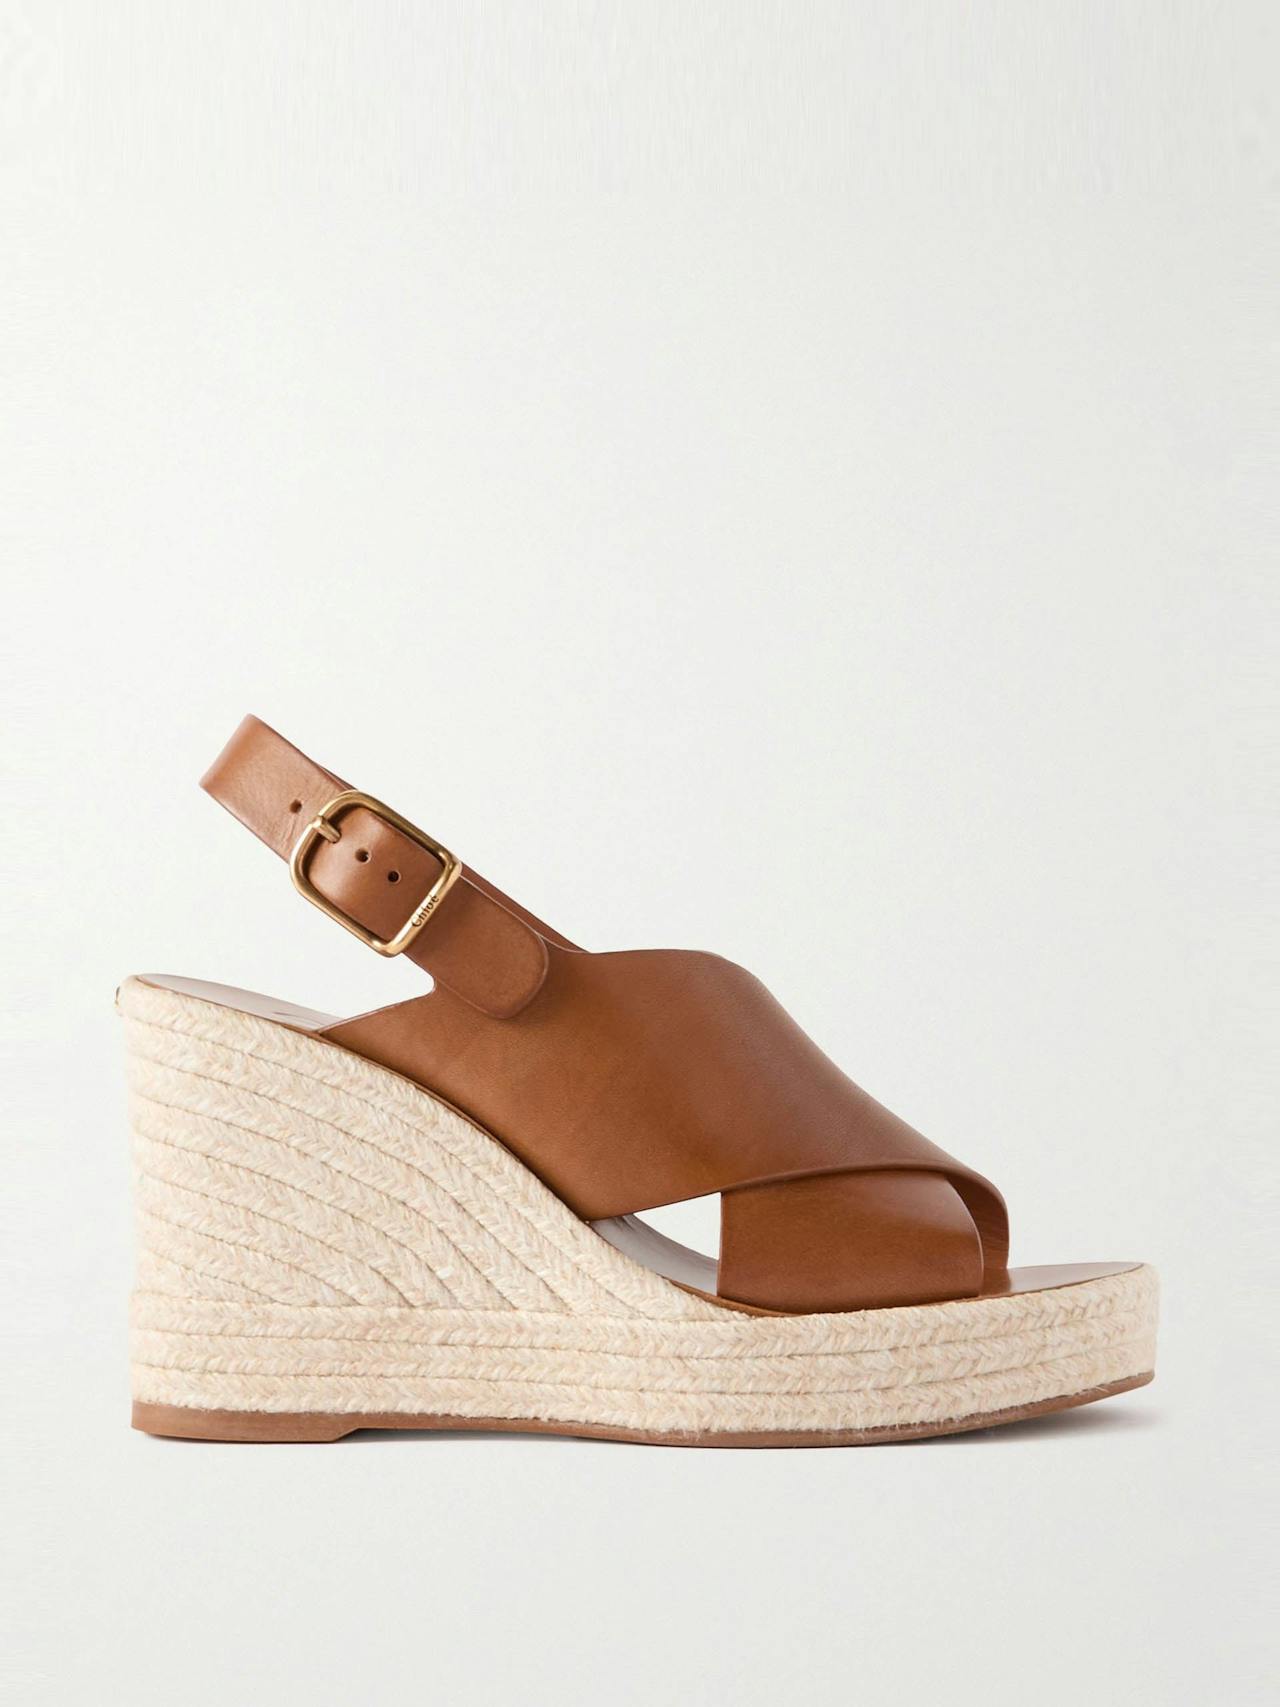 Pary leather espadrille wedge slingback sandals